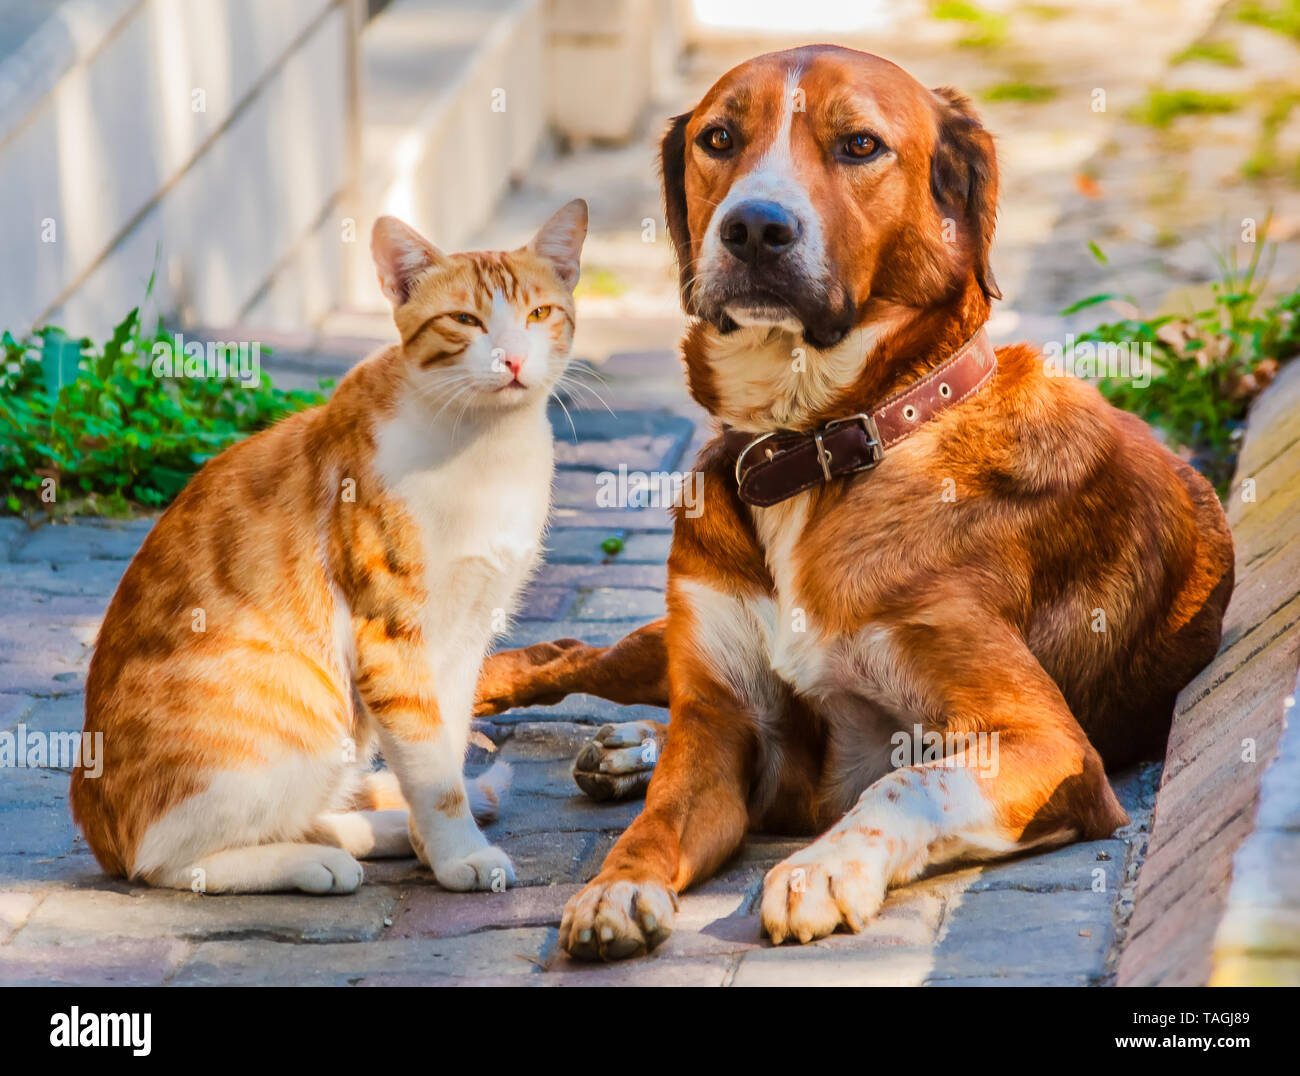 Cat and dog sitting together on a sidewalk. Stock Photo